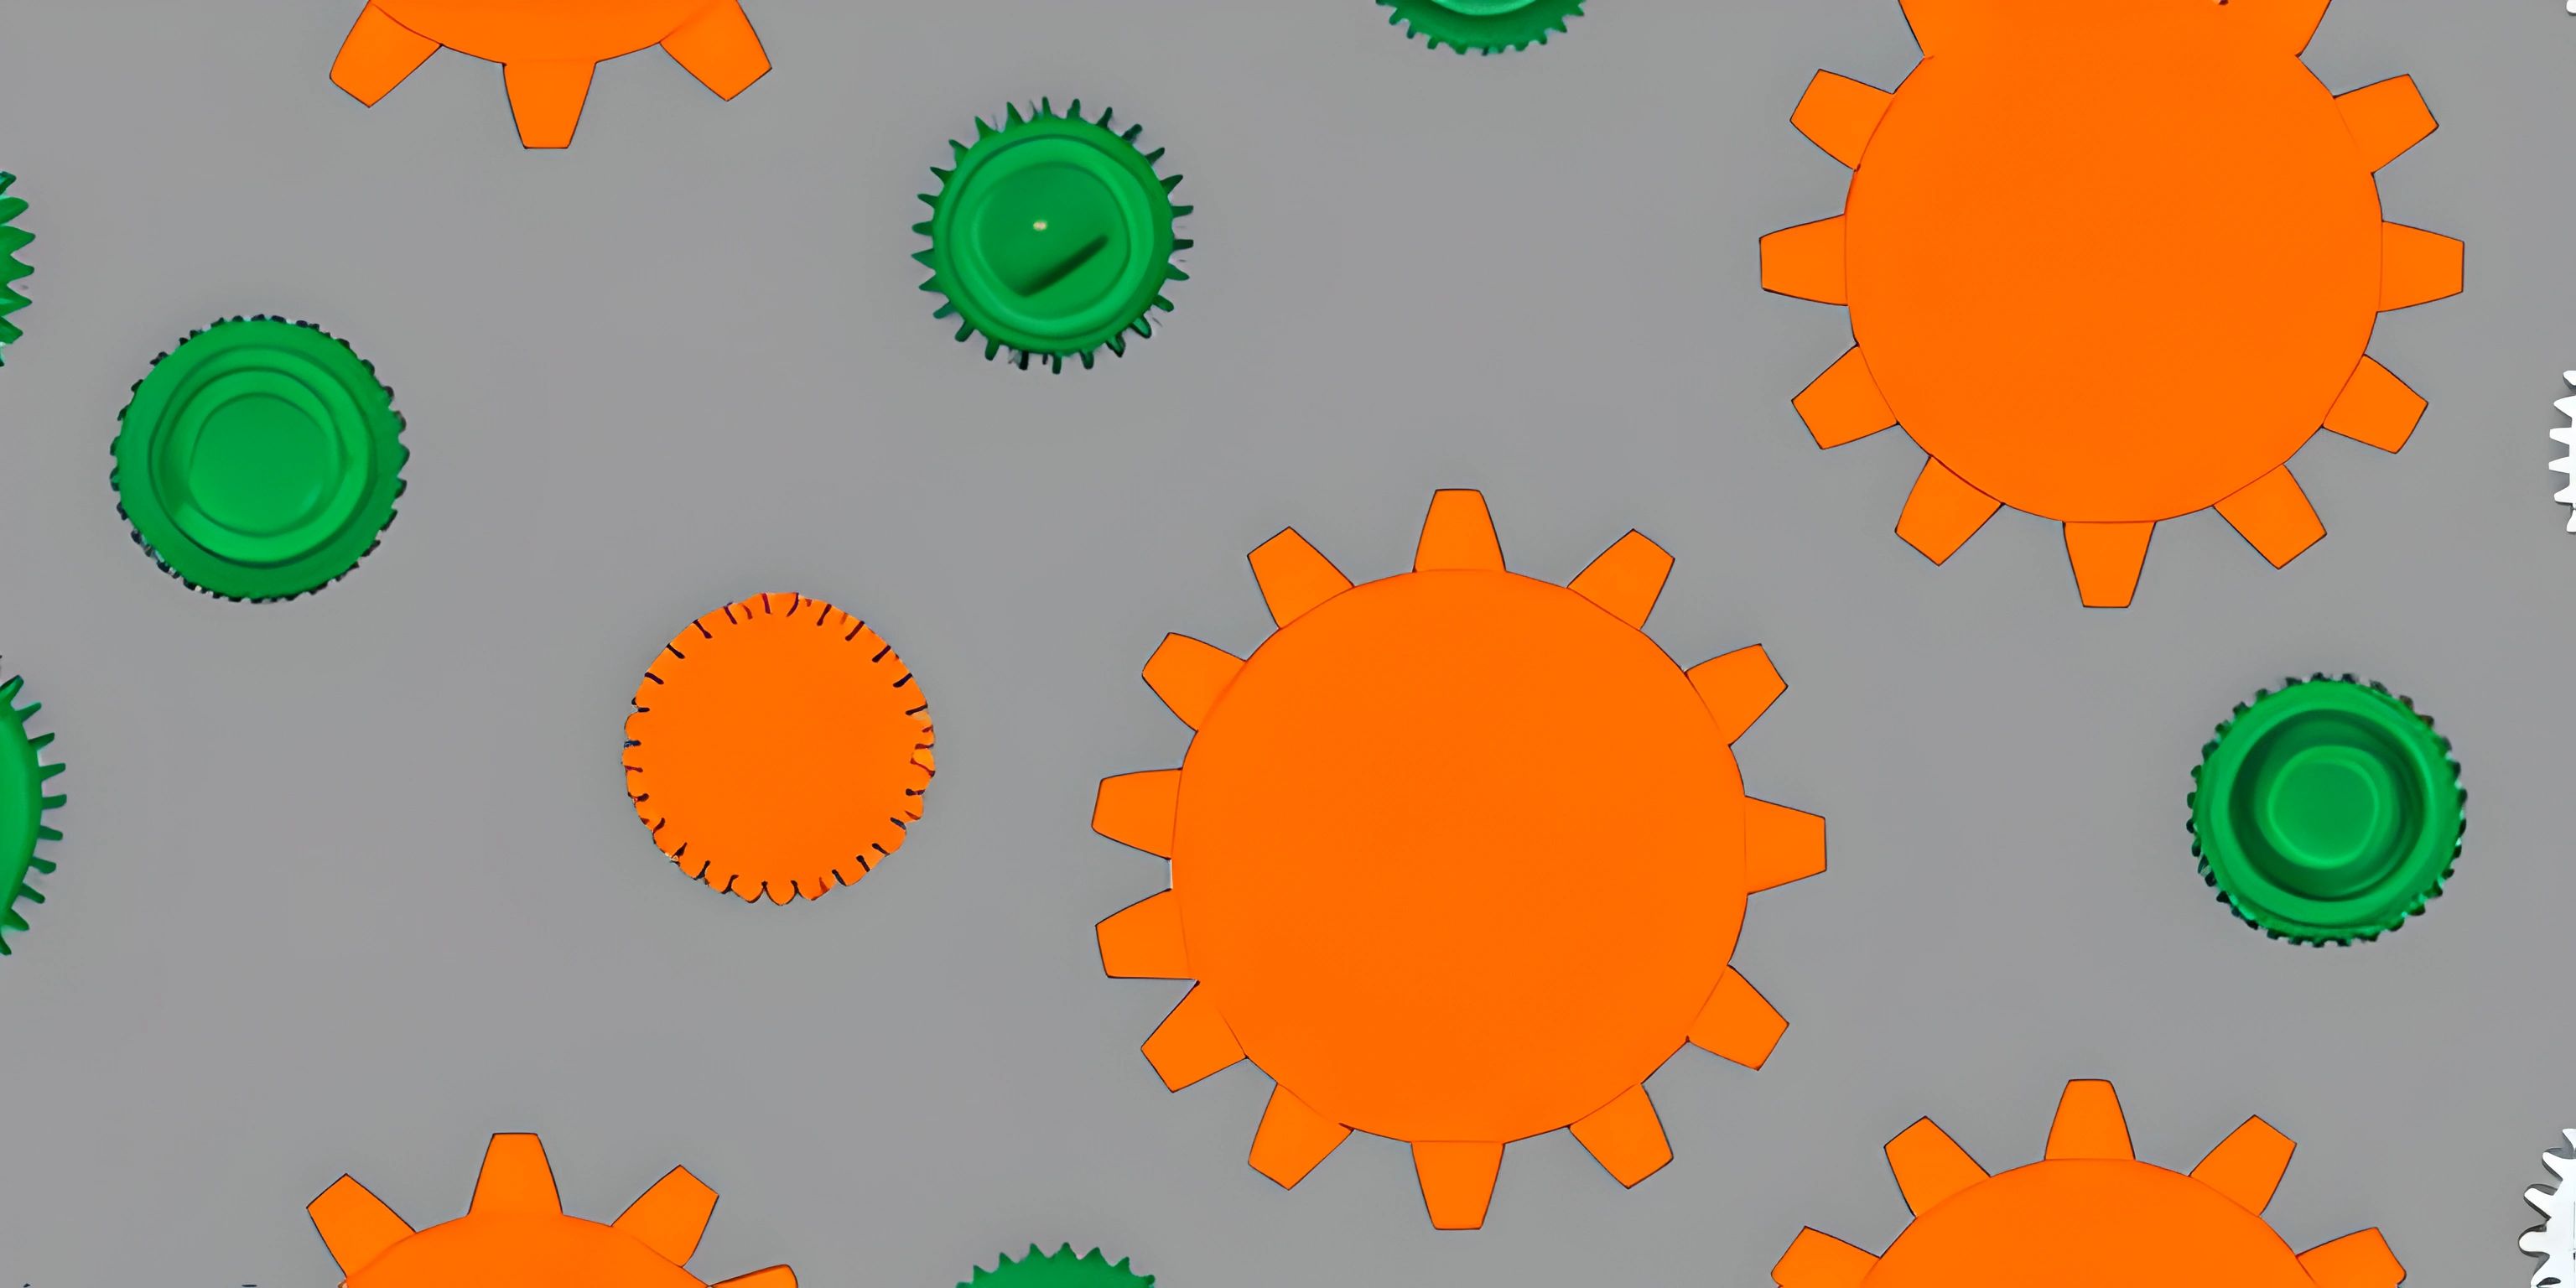 several orange, green, and black gears are arranged in rows and dots in grey